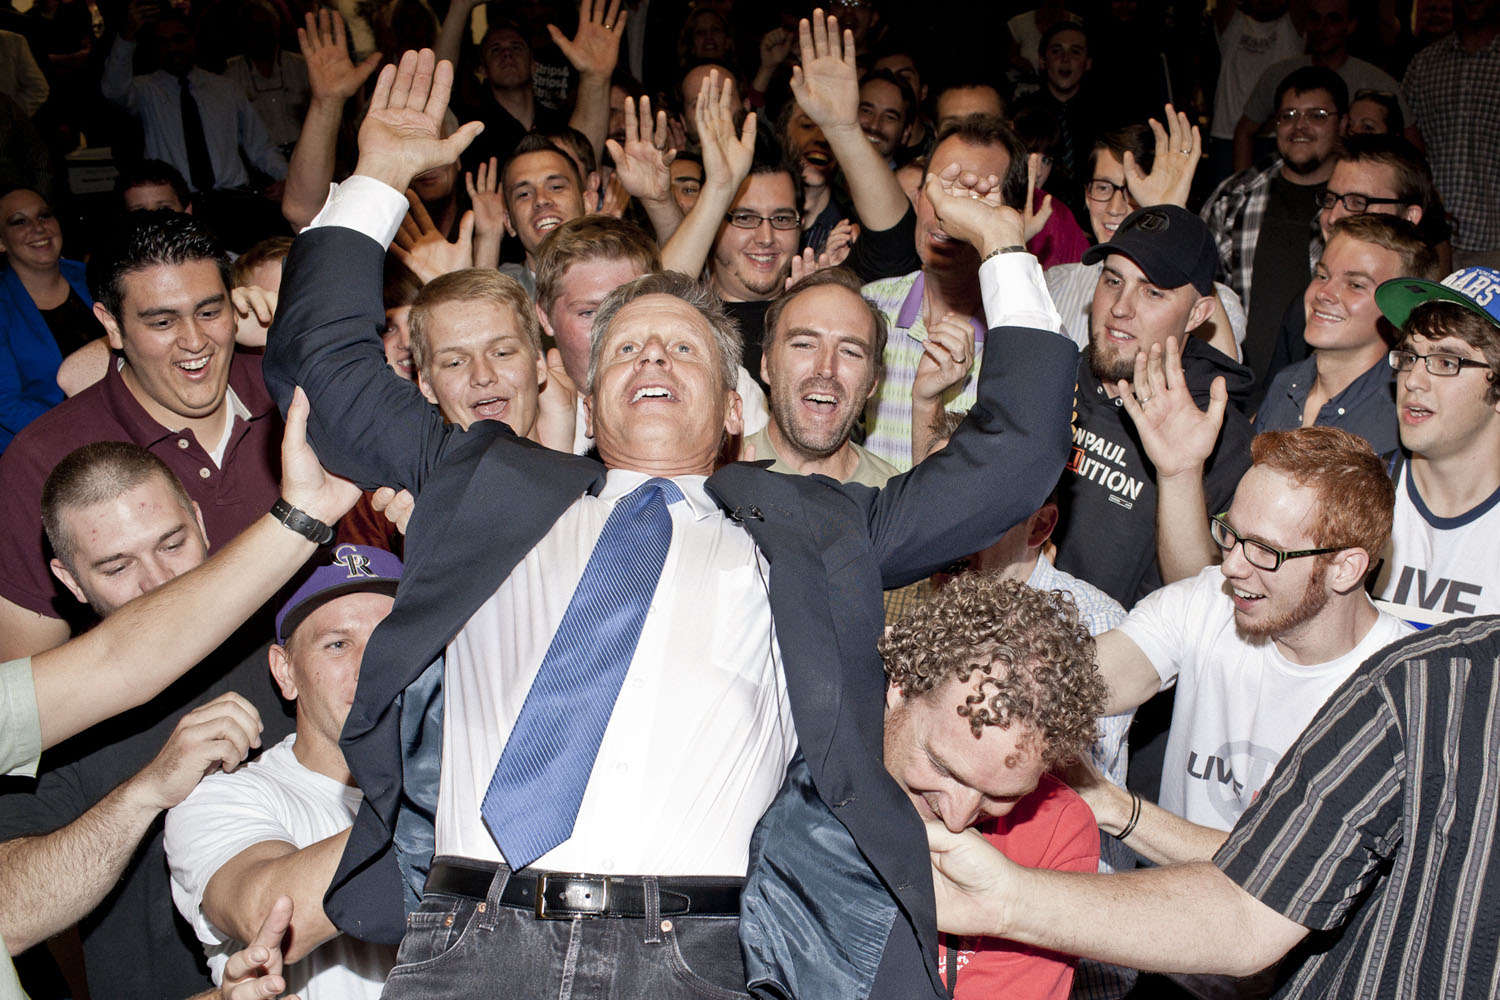 Image: Libertarian Party nominee, Gary Johnson crowd-surfs at a recent town hall meeting in Salt Lake City. Oct. 2, 2012.